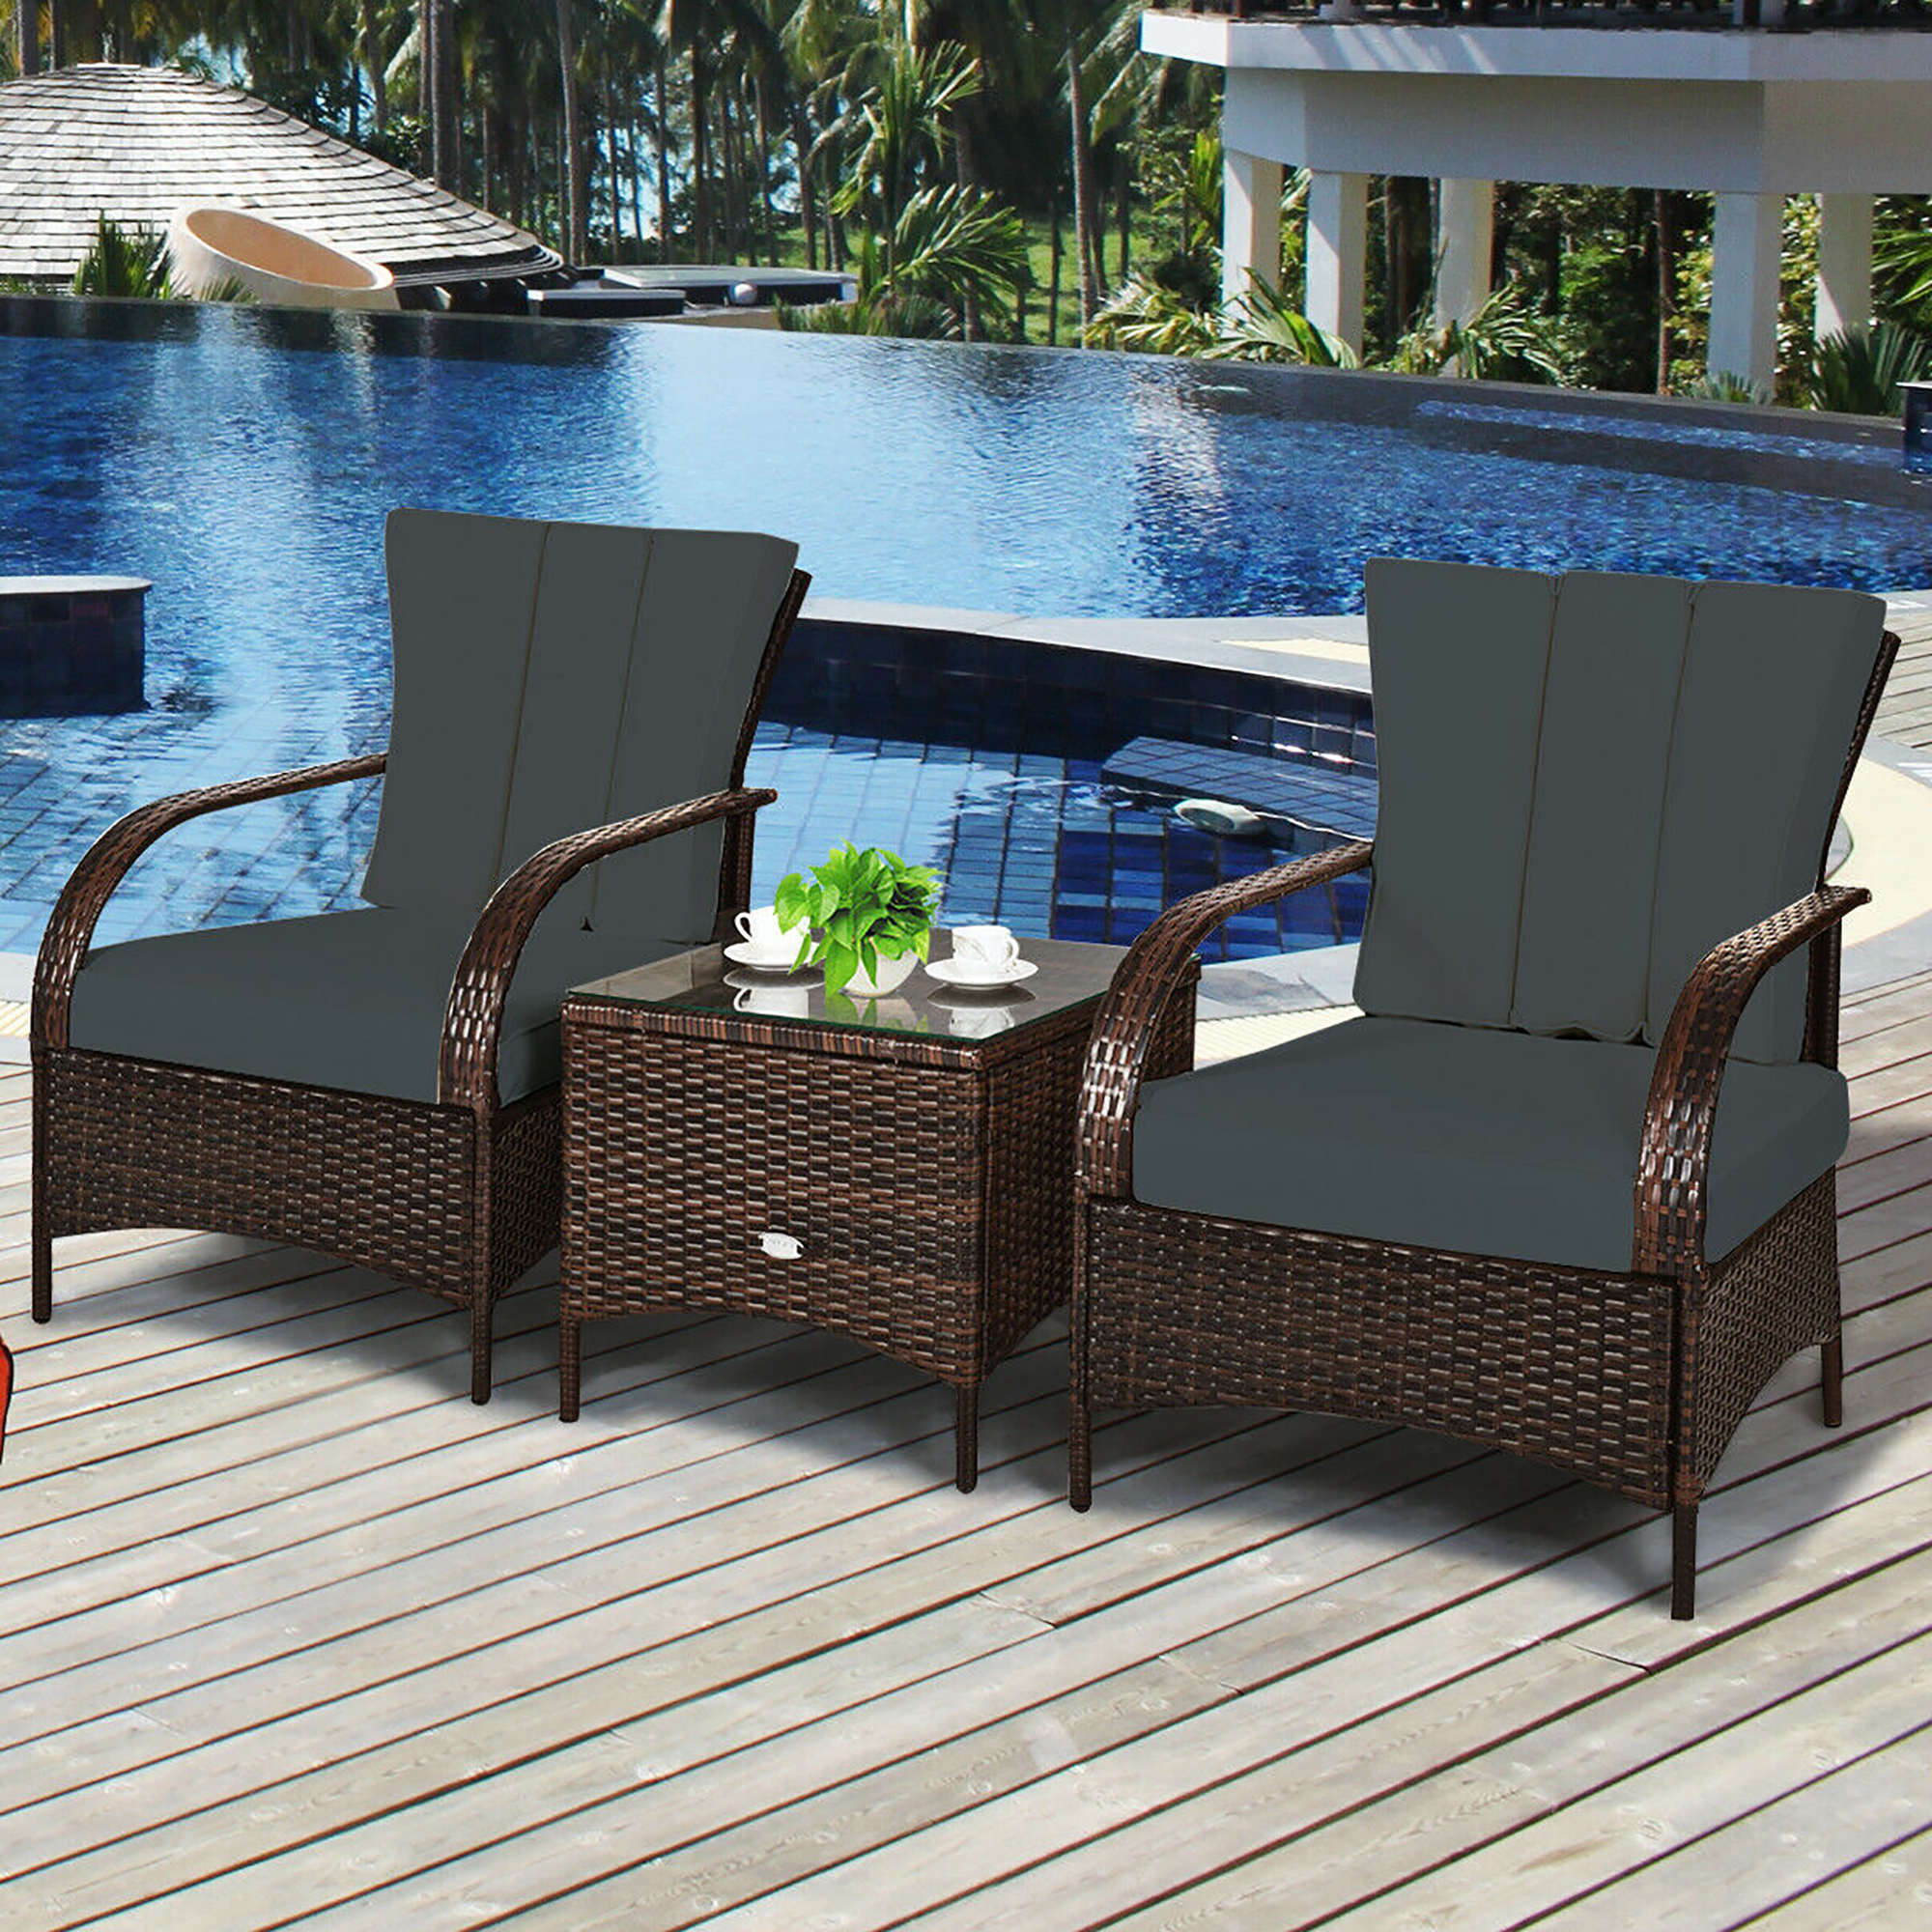 Costway 3 PCS Patio Rattan Furniture Set Coffee Table & 2 Rattan Chair W/Gray Cushions - image 5 of 10